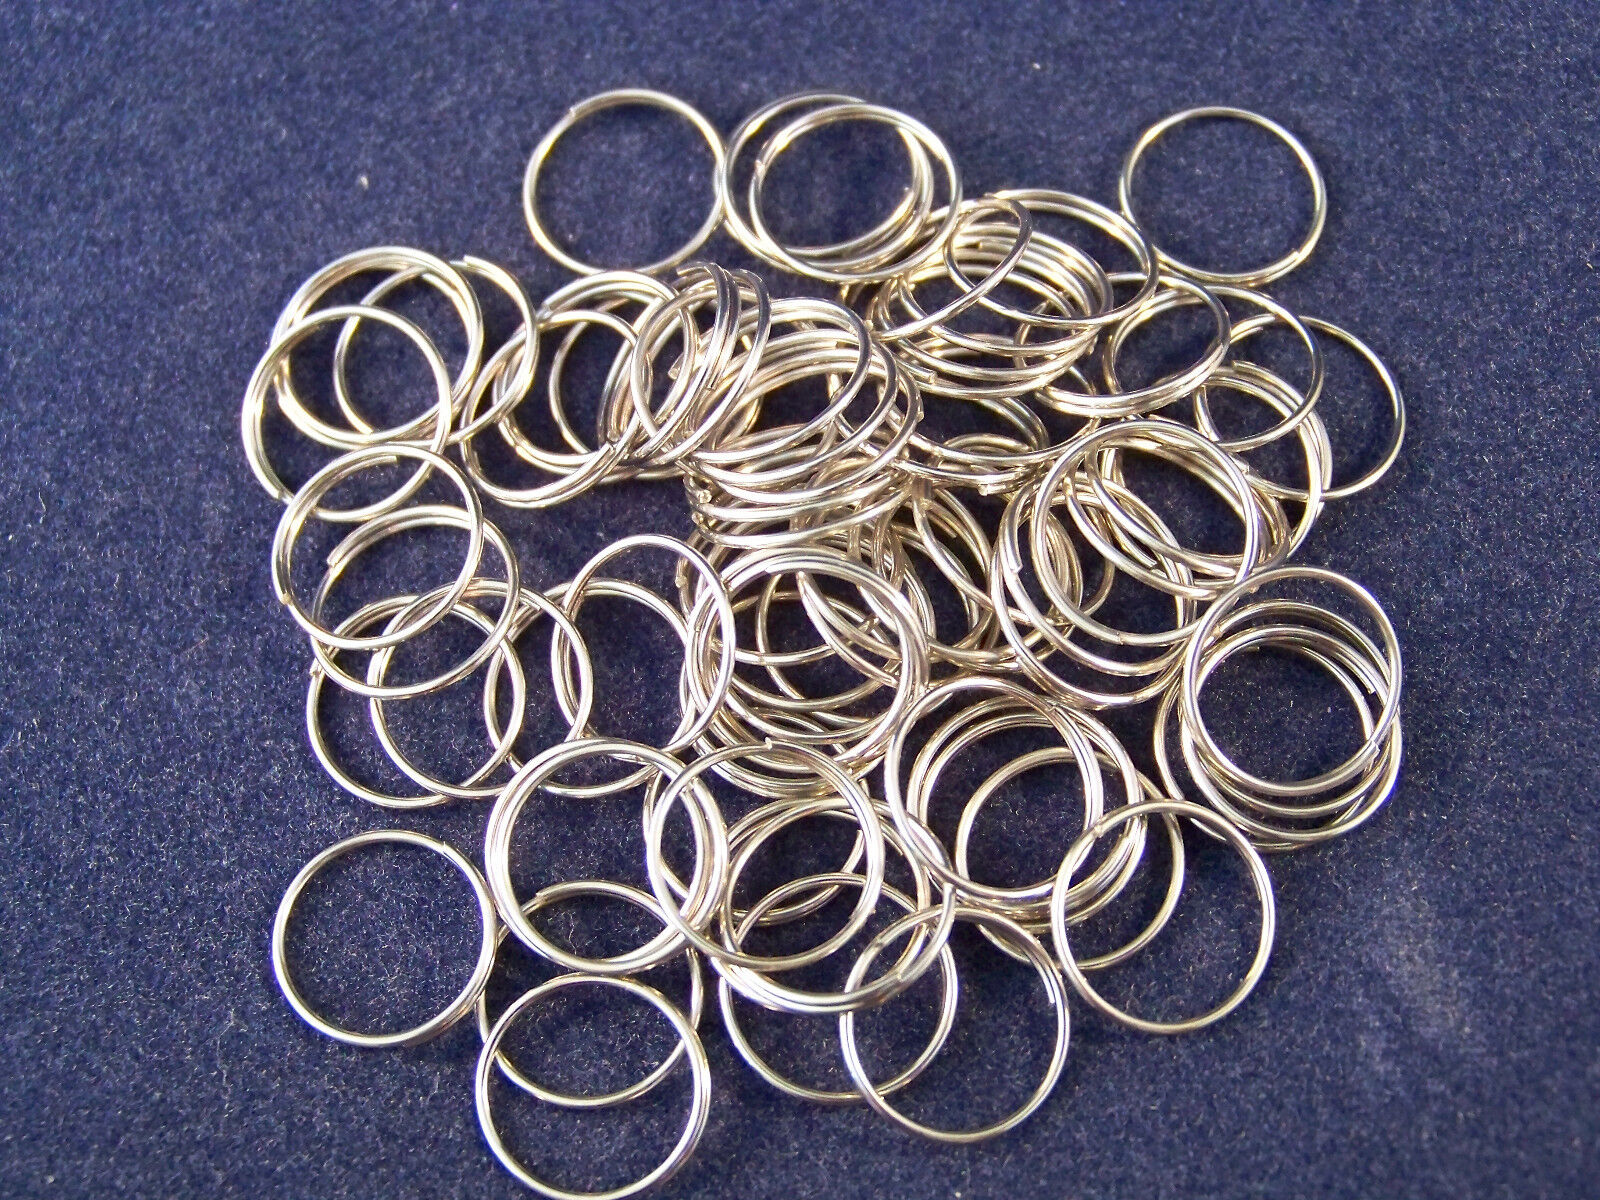 50 PC 12MM SILVER RING CONNECTOR CHANDELIER PARTS CHAIN CRYSTAL HANGING